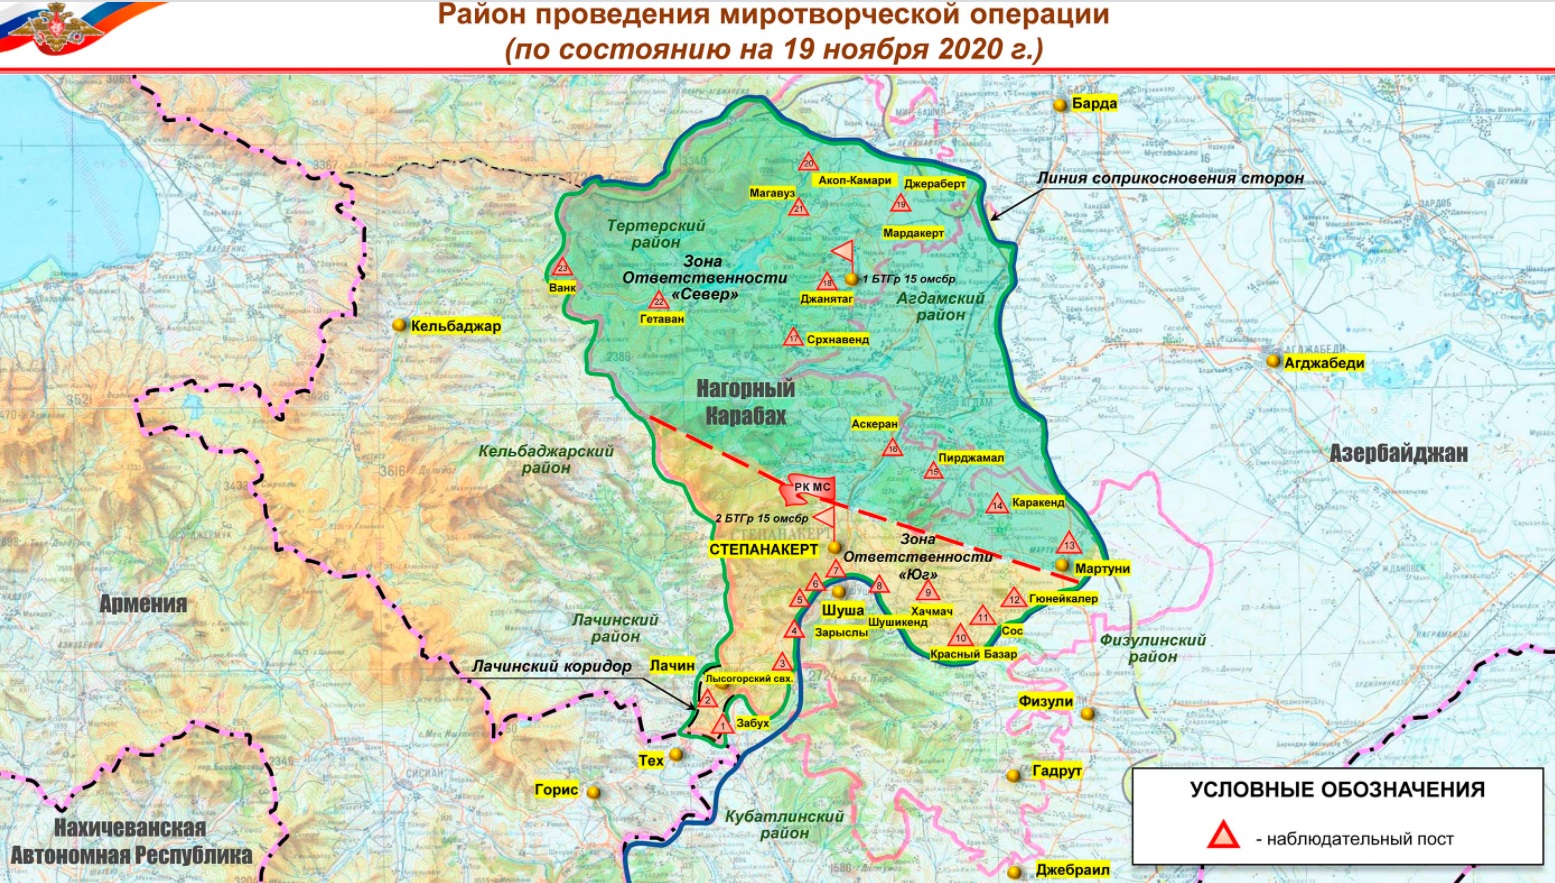 Information Bulletin of the Ministry of defense of the Russian Federation on the deployment of the Russian military contingent of the peacekeeping forces in the Nagorno-Karabakh conflict zone (for November 19, 2020)